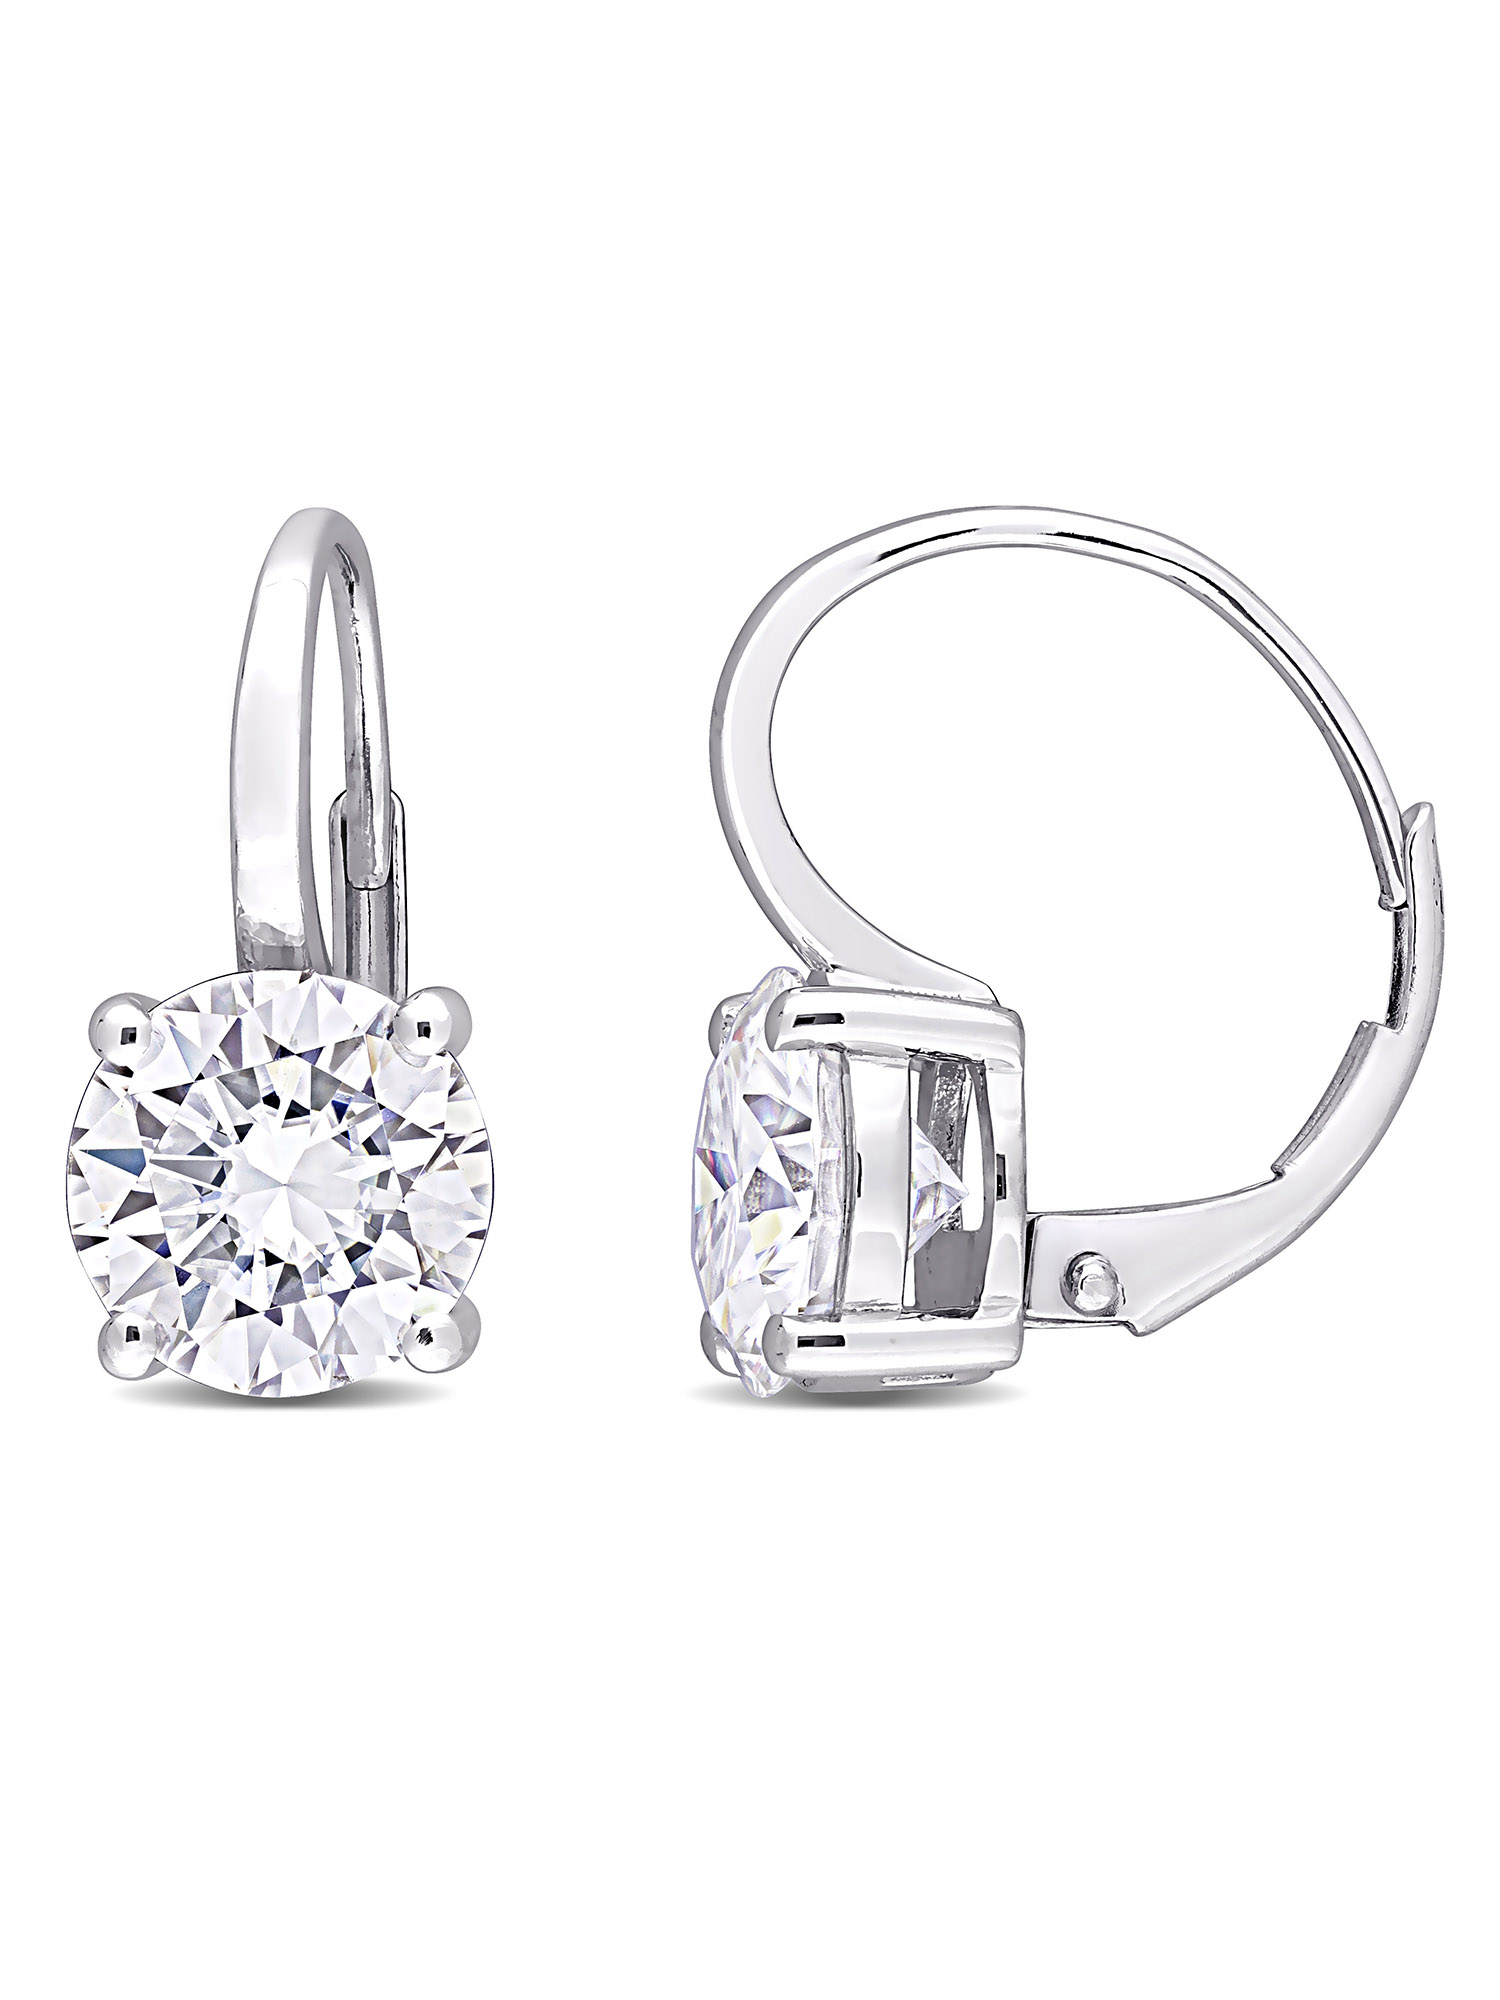 Everly 4 Carat T.G.W. Dew Created Moissanite 14kt White Gold Circular Leverback Earrings - image 1 of 4